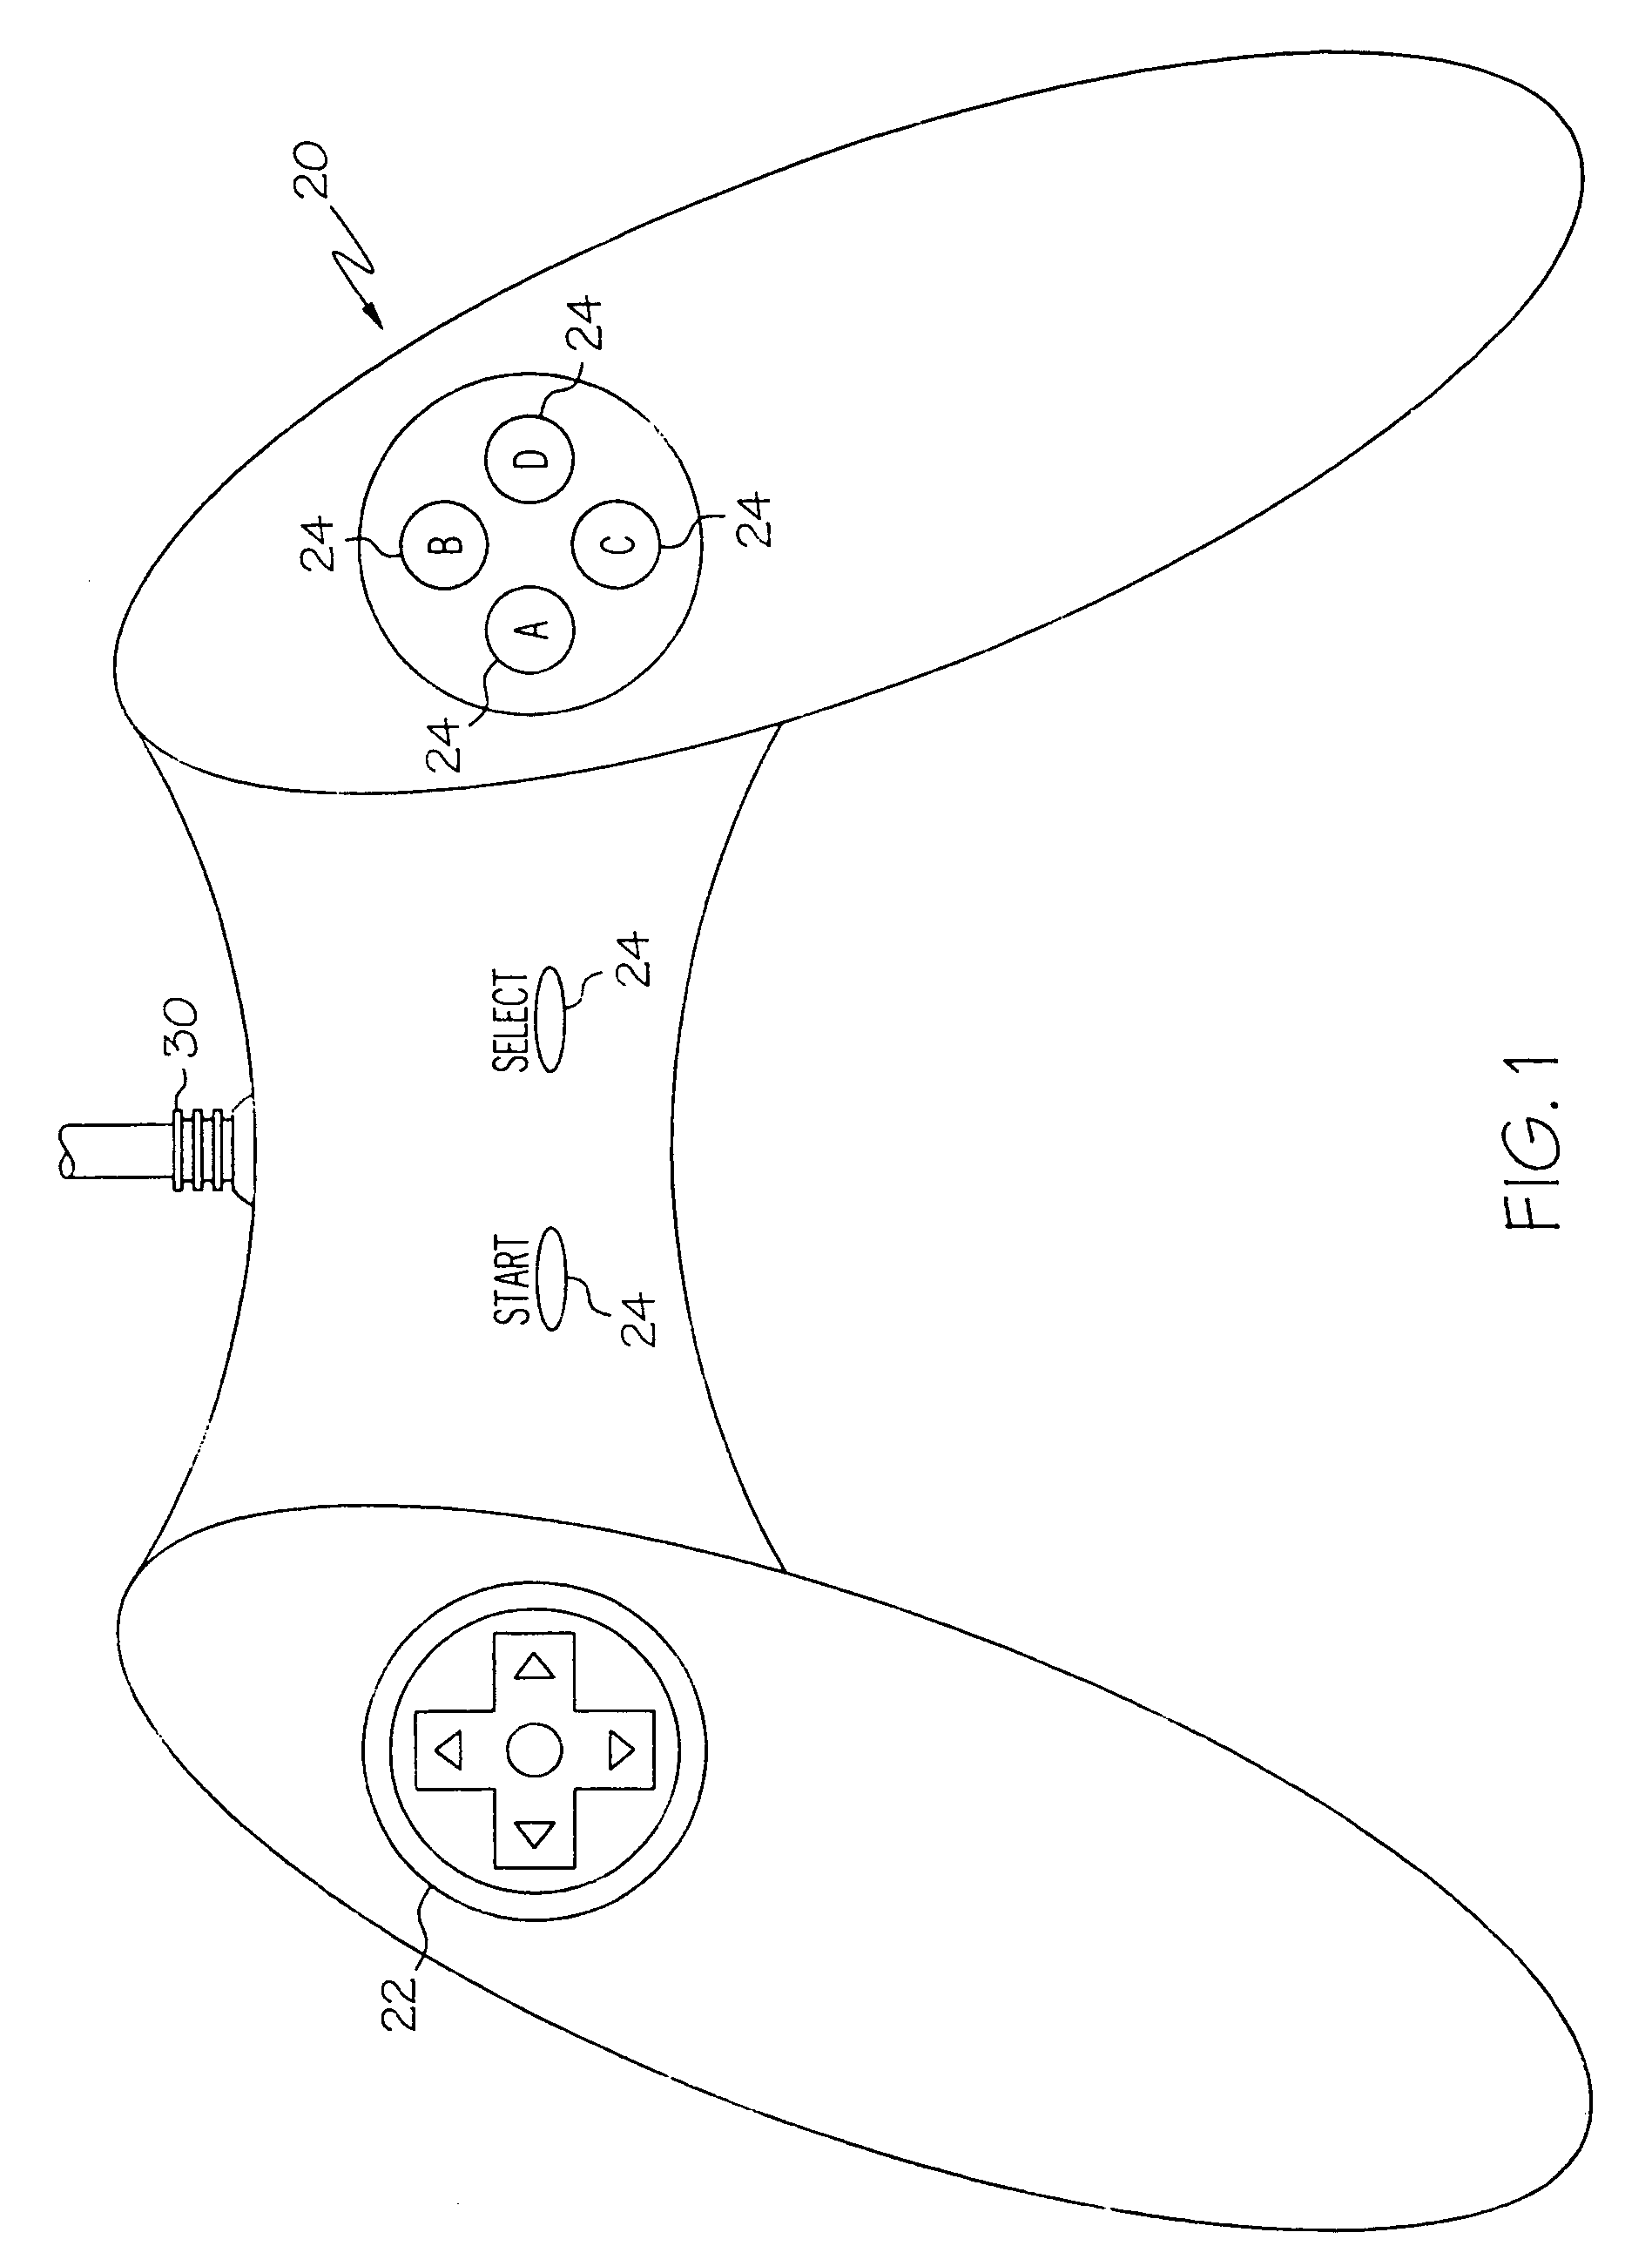 Video game system and game controller